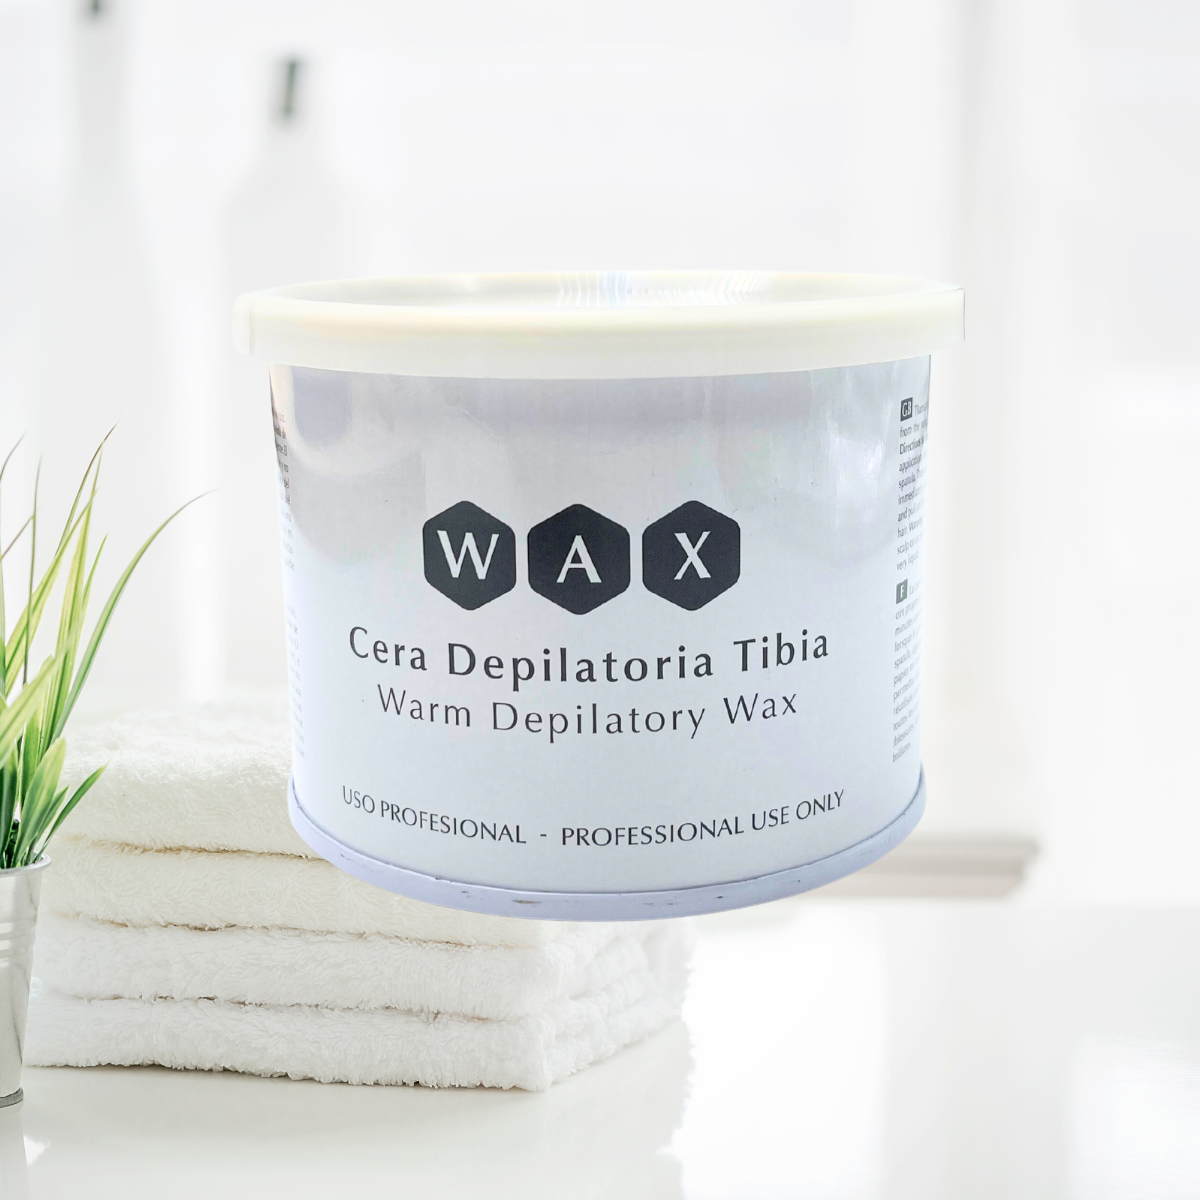 Depilcompany Soft Wax Natural Can - 14 oz. (2 Units Offer) - Buy professional cosmetics dedicated to hair removal